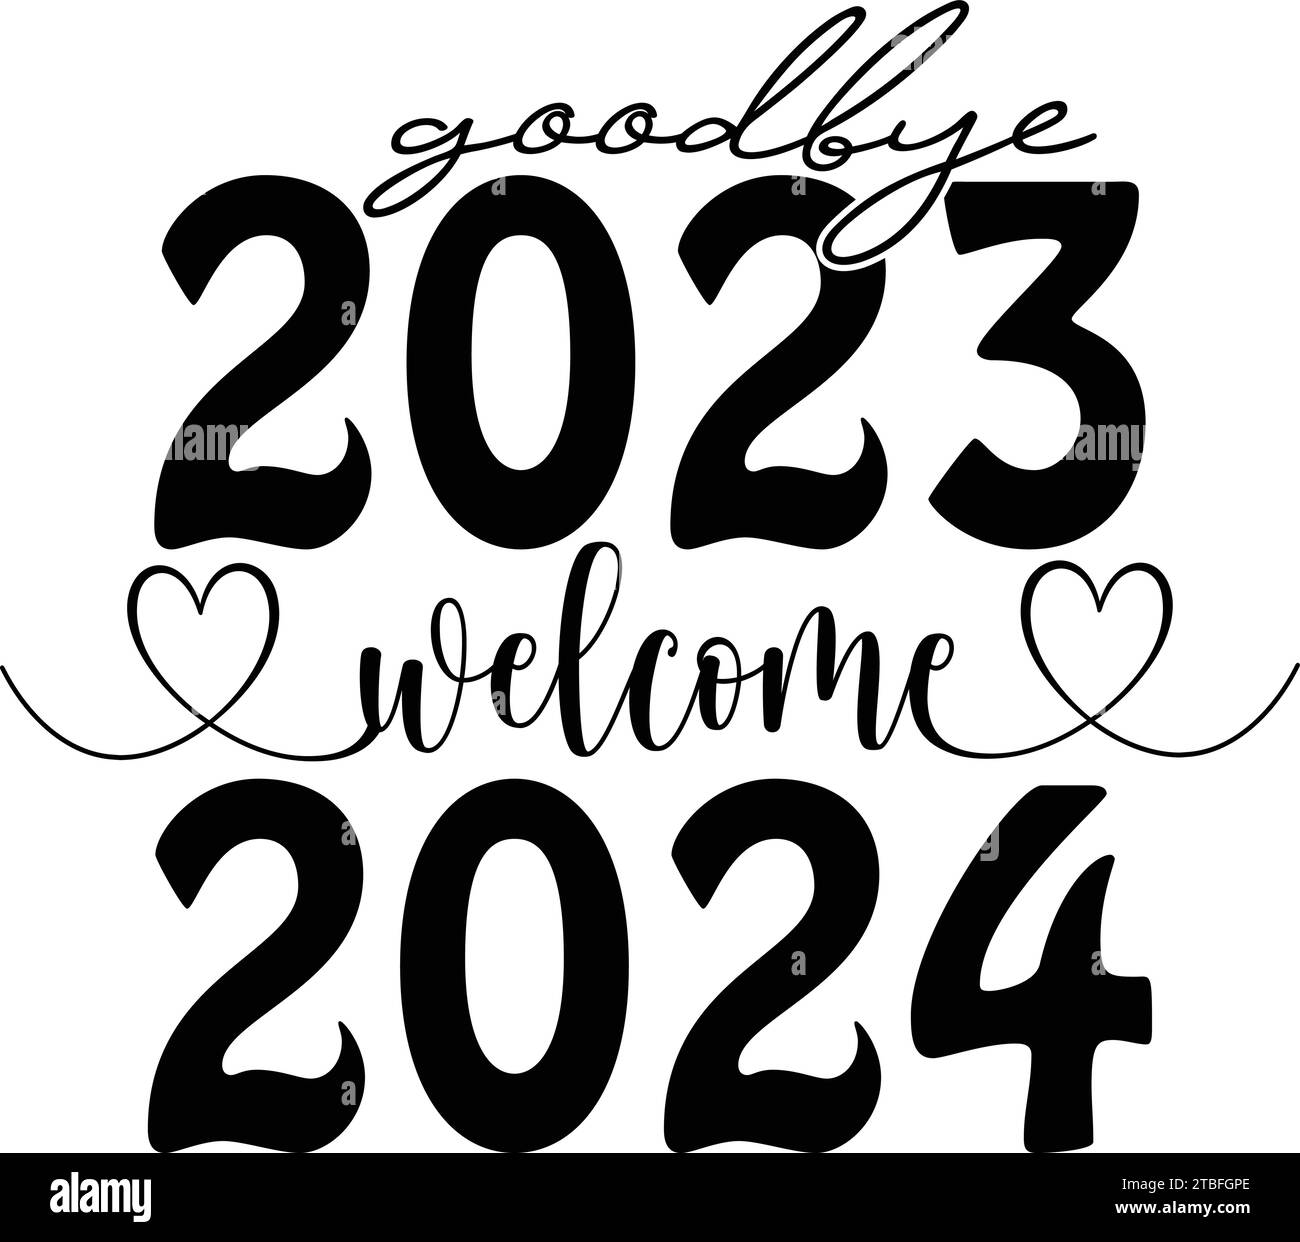 2023 2023 2024 Cut Out Stock Images & Pictures - Alamy